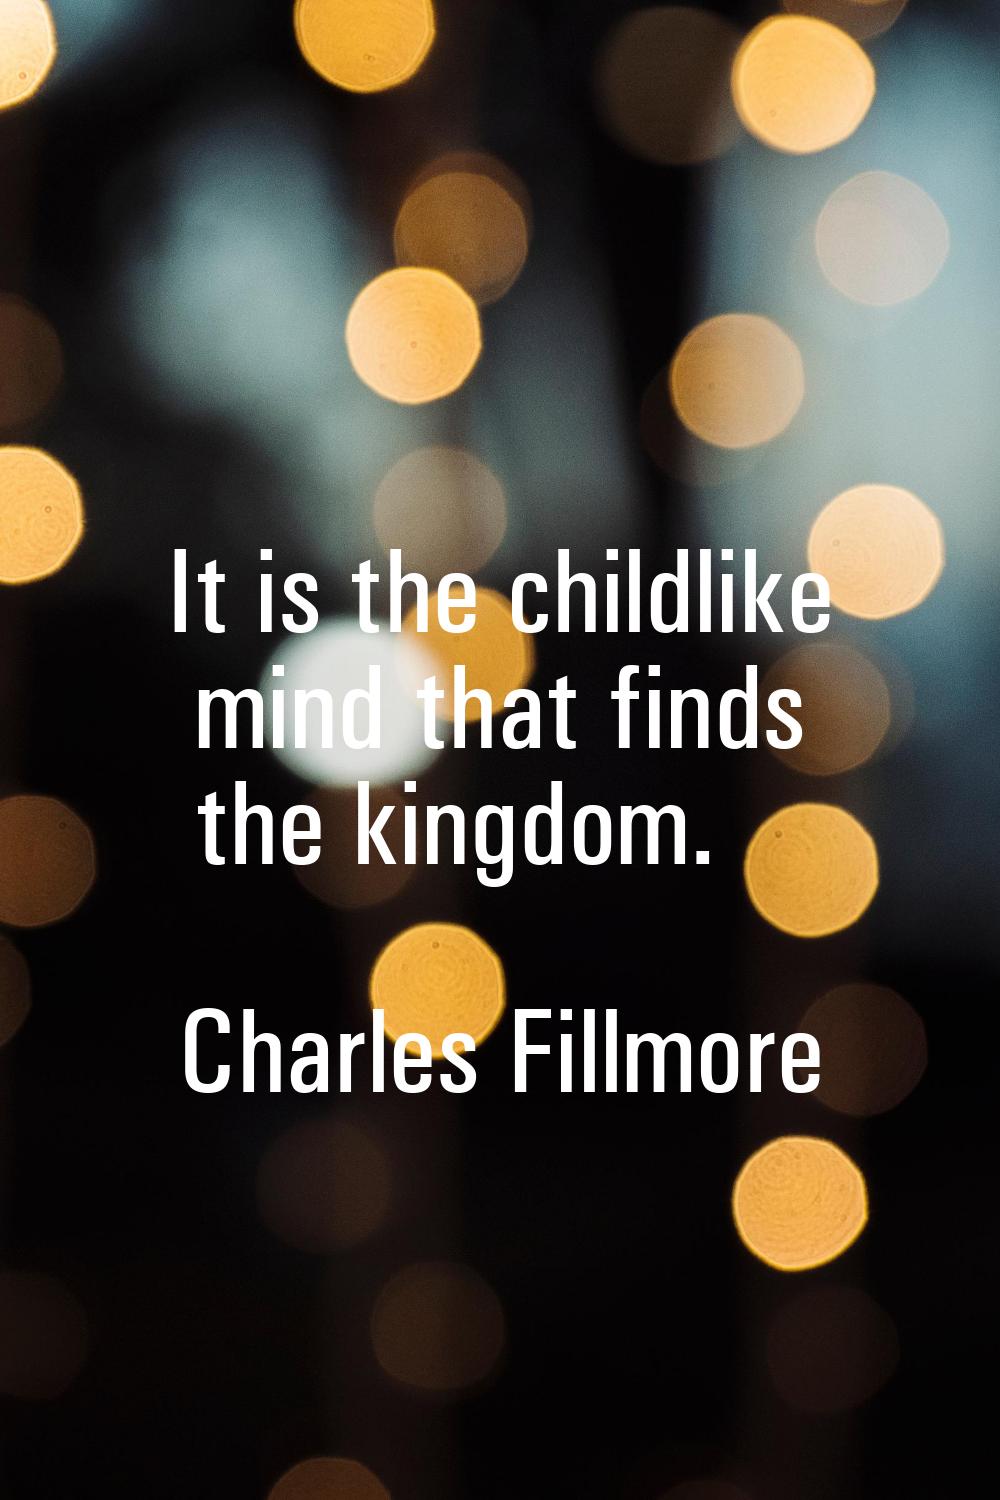 It is the childlike mind that finds the kingdom.